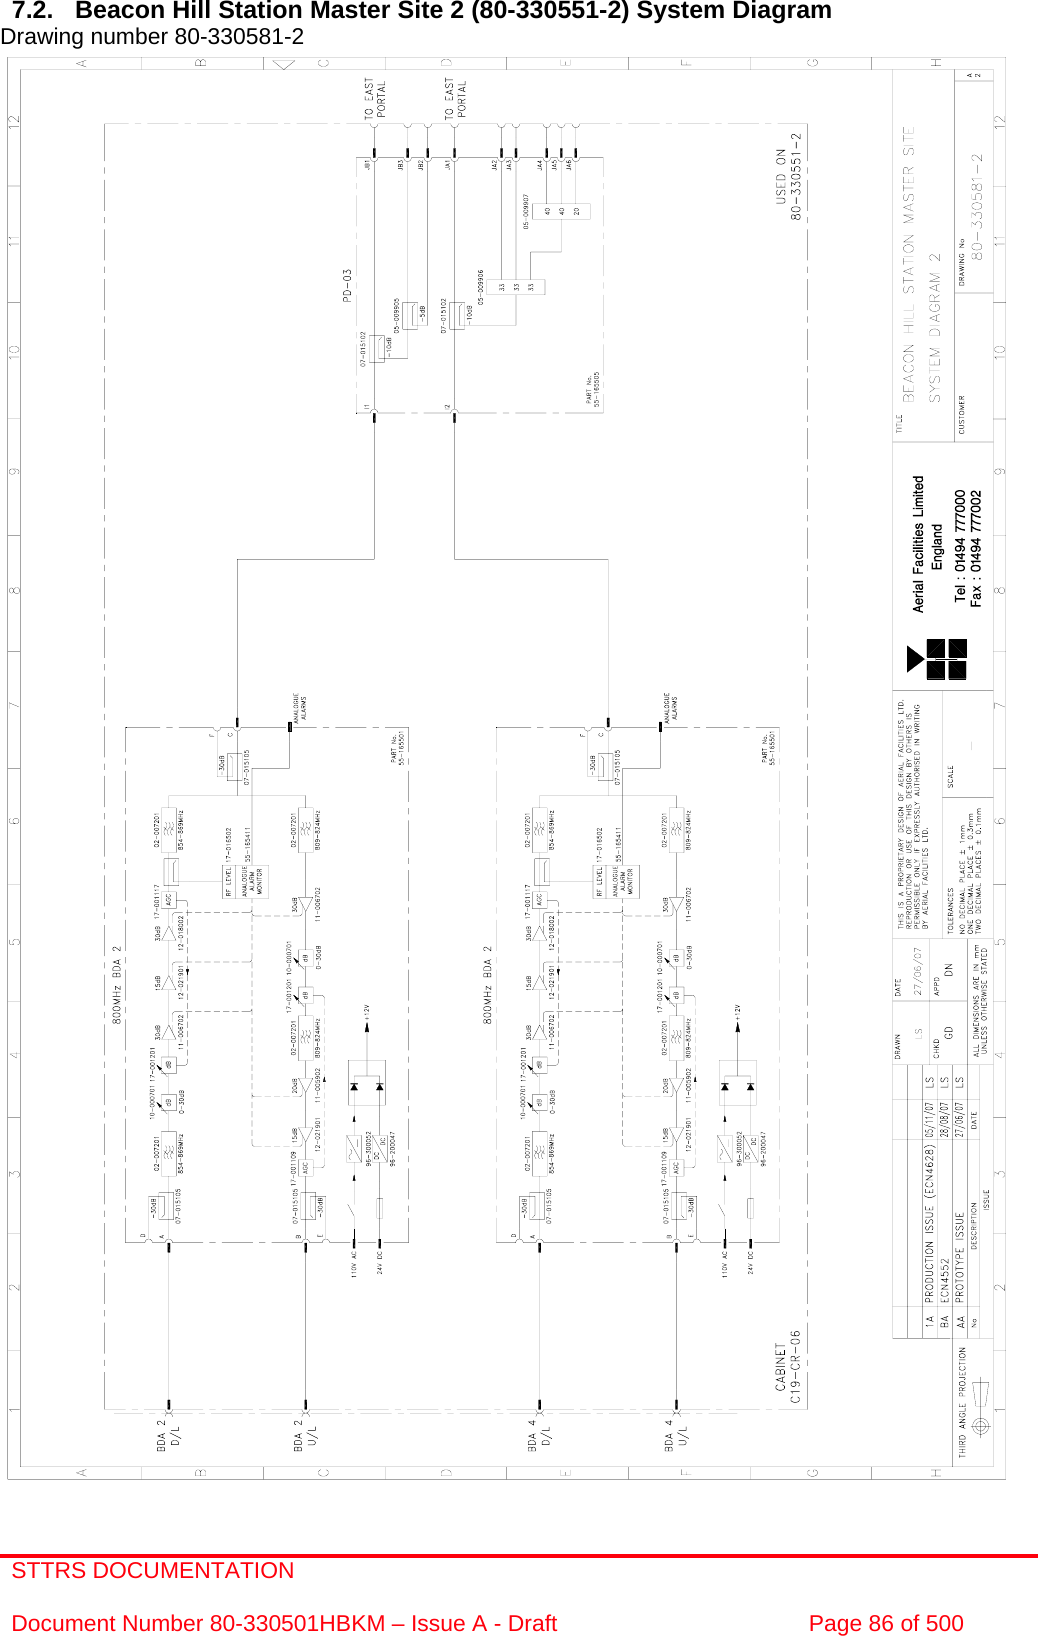 STTRS DOCUMENTATION  Document Number 80-330501HBKM – Issue A - Draft  Page 86 of 500   7.2.  Beacon Hill Station Master Site 2 (80-330551-2) System Diagram Drawing number 80-330581-2                                                      